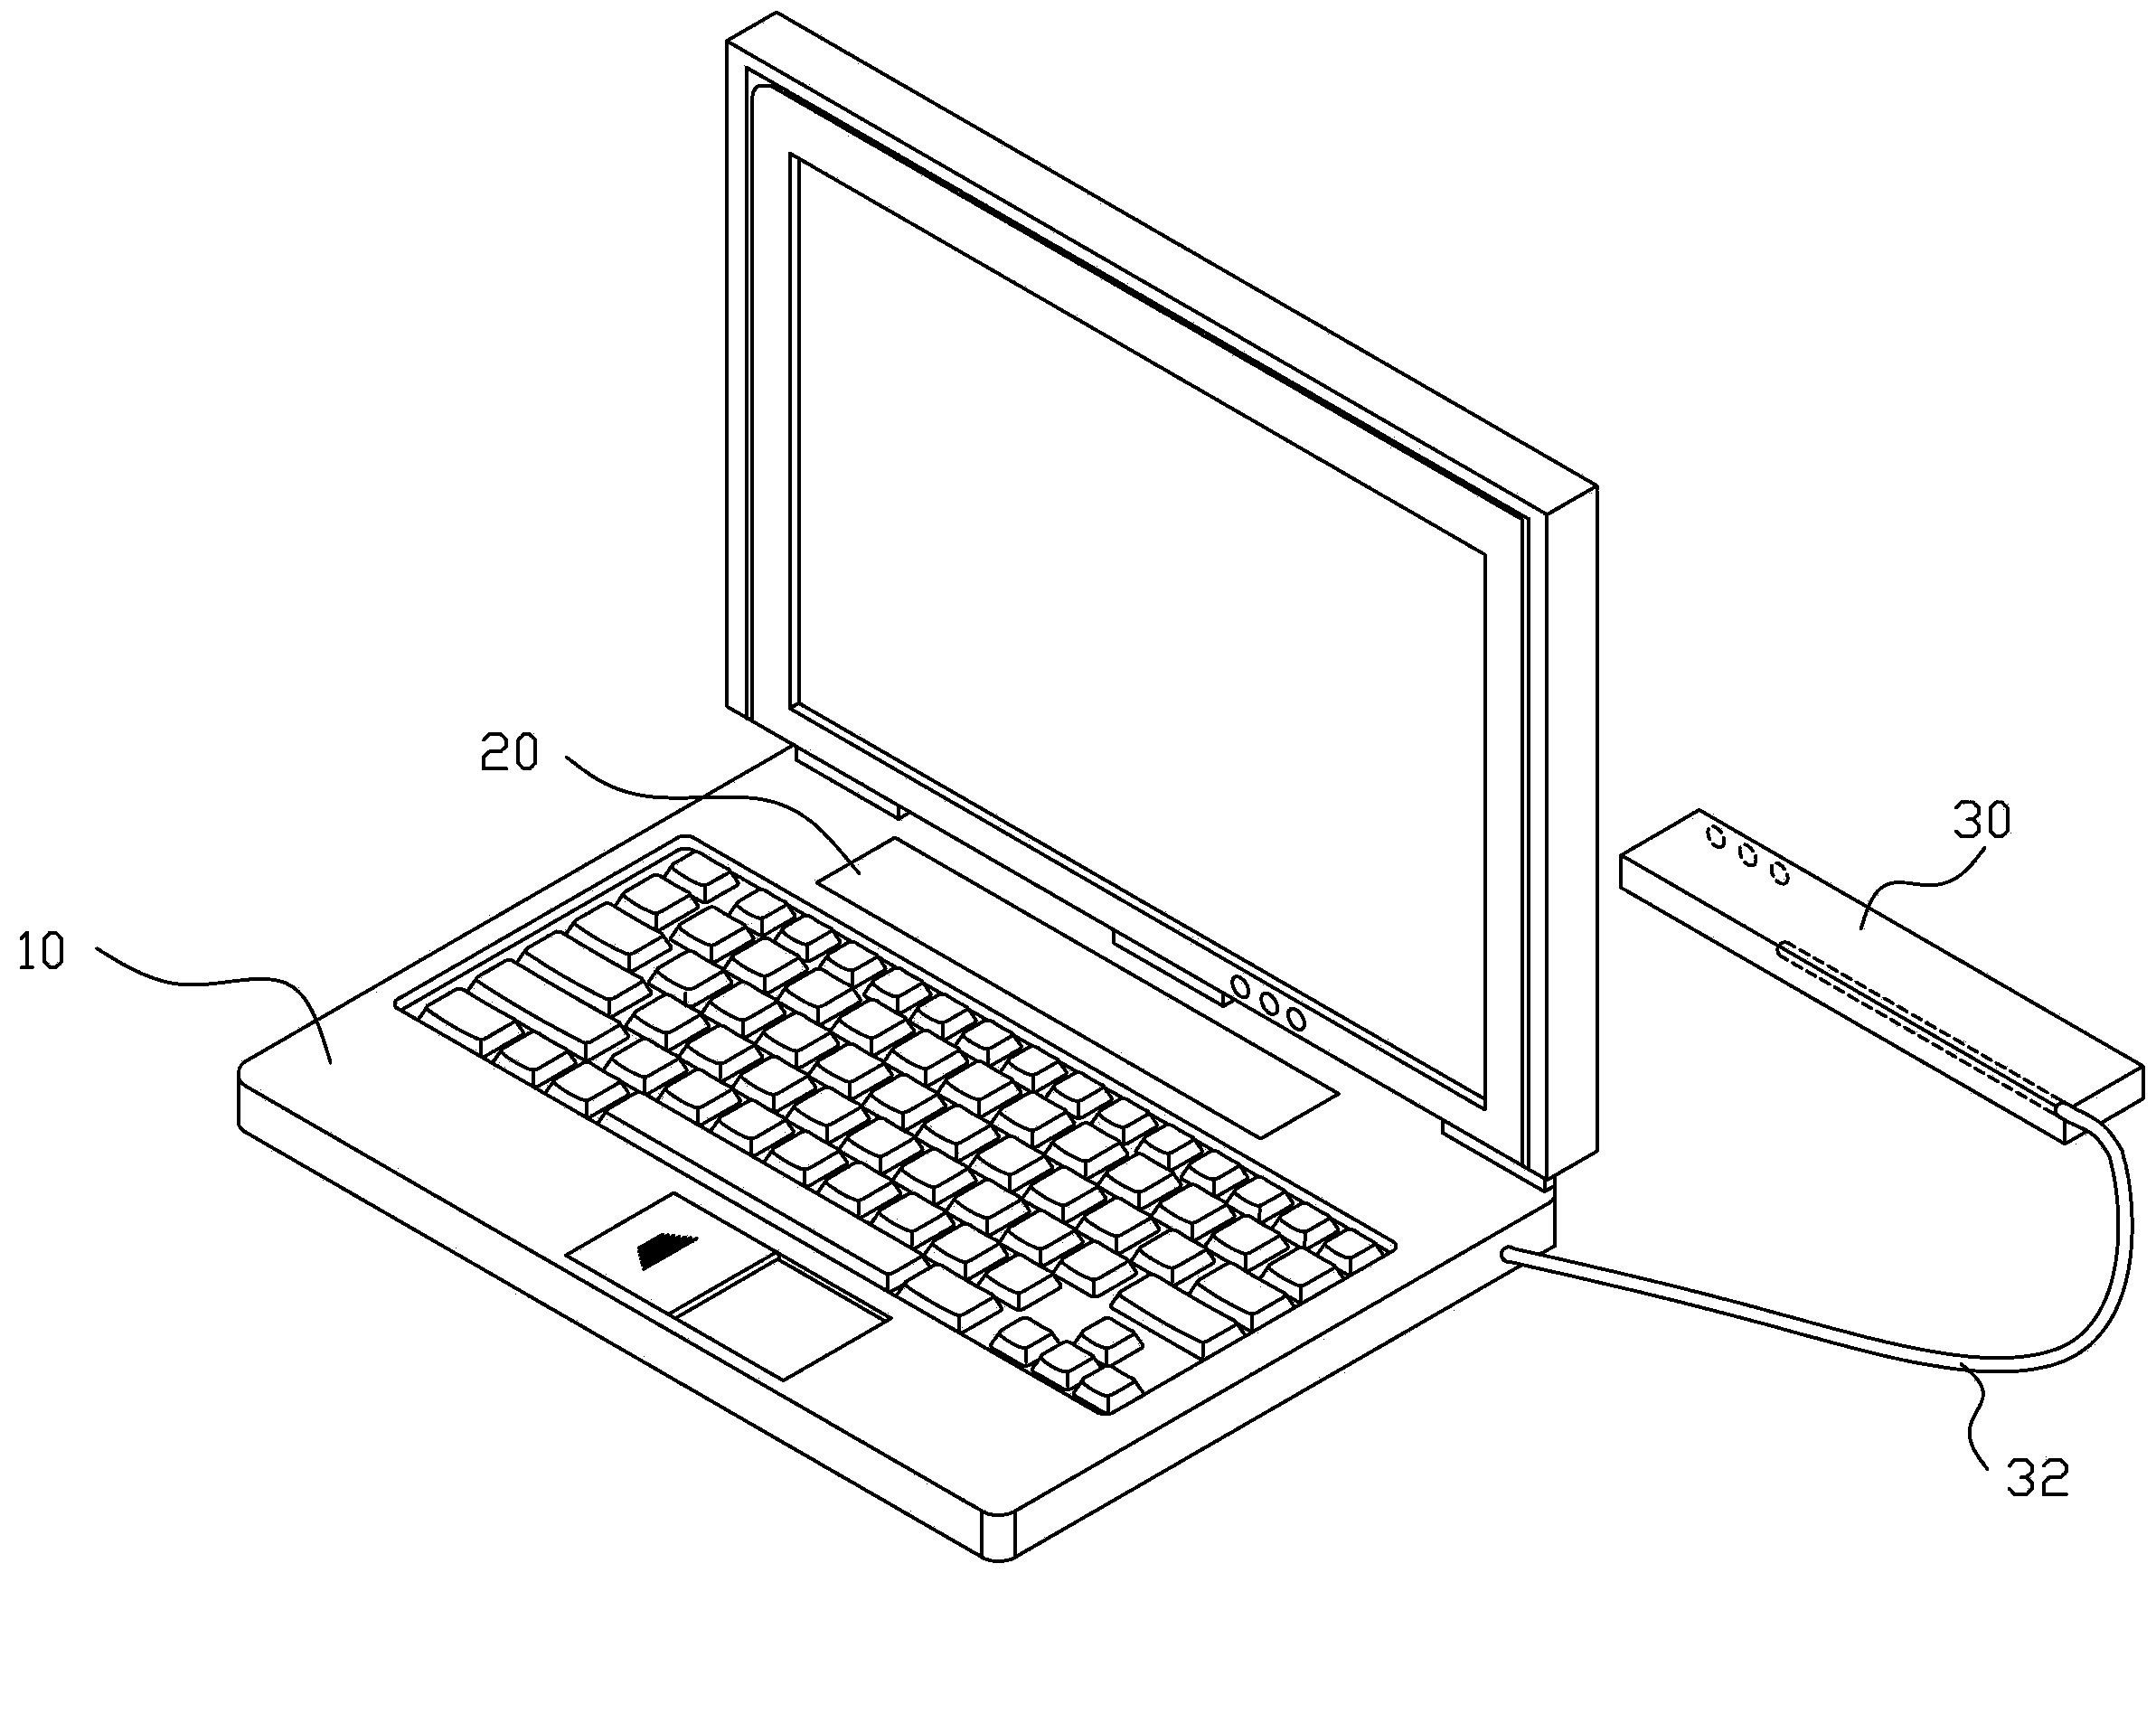 Seamless removable laptop battery